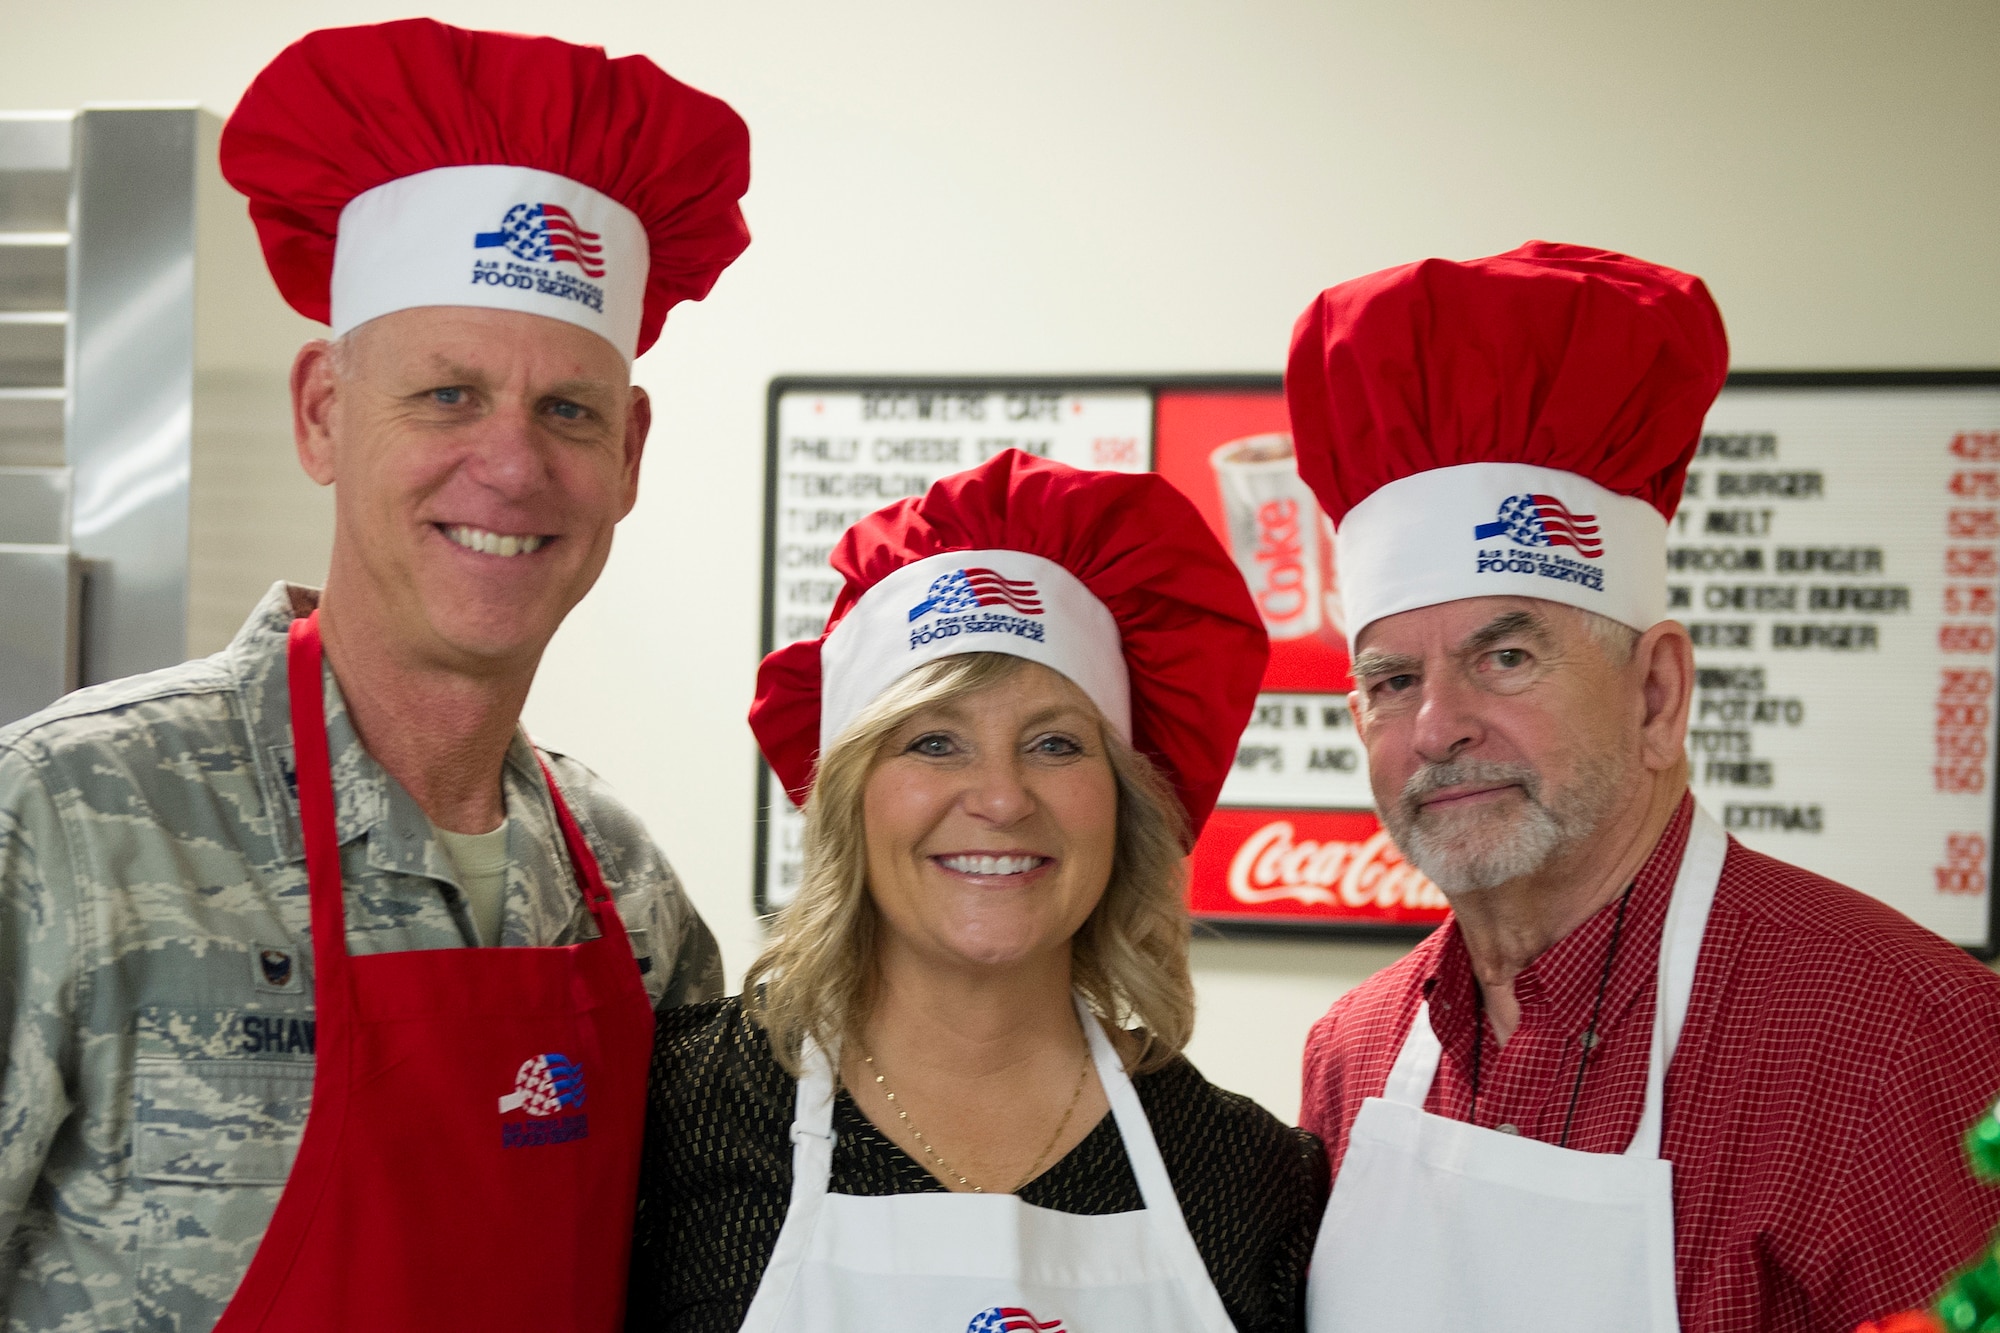 Col. Larry Shaw, 434th Air Refueling Wing Commander, poses for a photo with his wife Kris and Grissom Community Council member Hal Job, in the dining facility at Grissom Air Reserve Base, Indiana, Dec. 7, 2019. Wing leadership and GCC members helped served holiday staples prepared by the 434th Force Support Squadron during the December Unit Training Assembly. (U.S. Air Force photo/ Staff Sgt. Courtney Dotson-Essett)